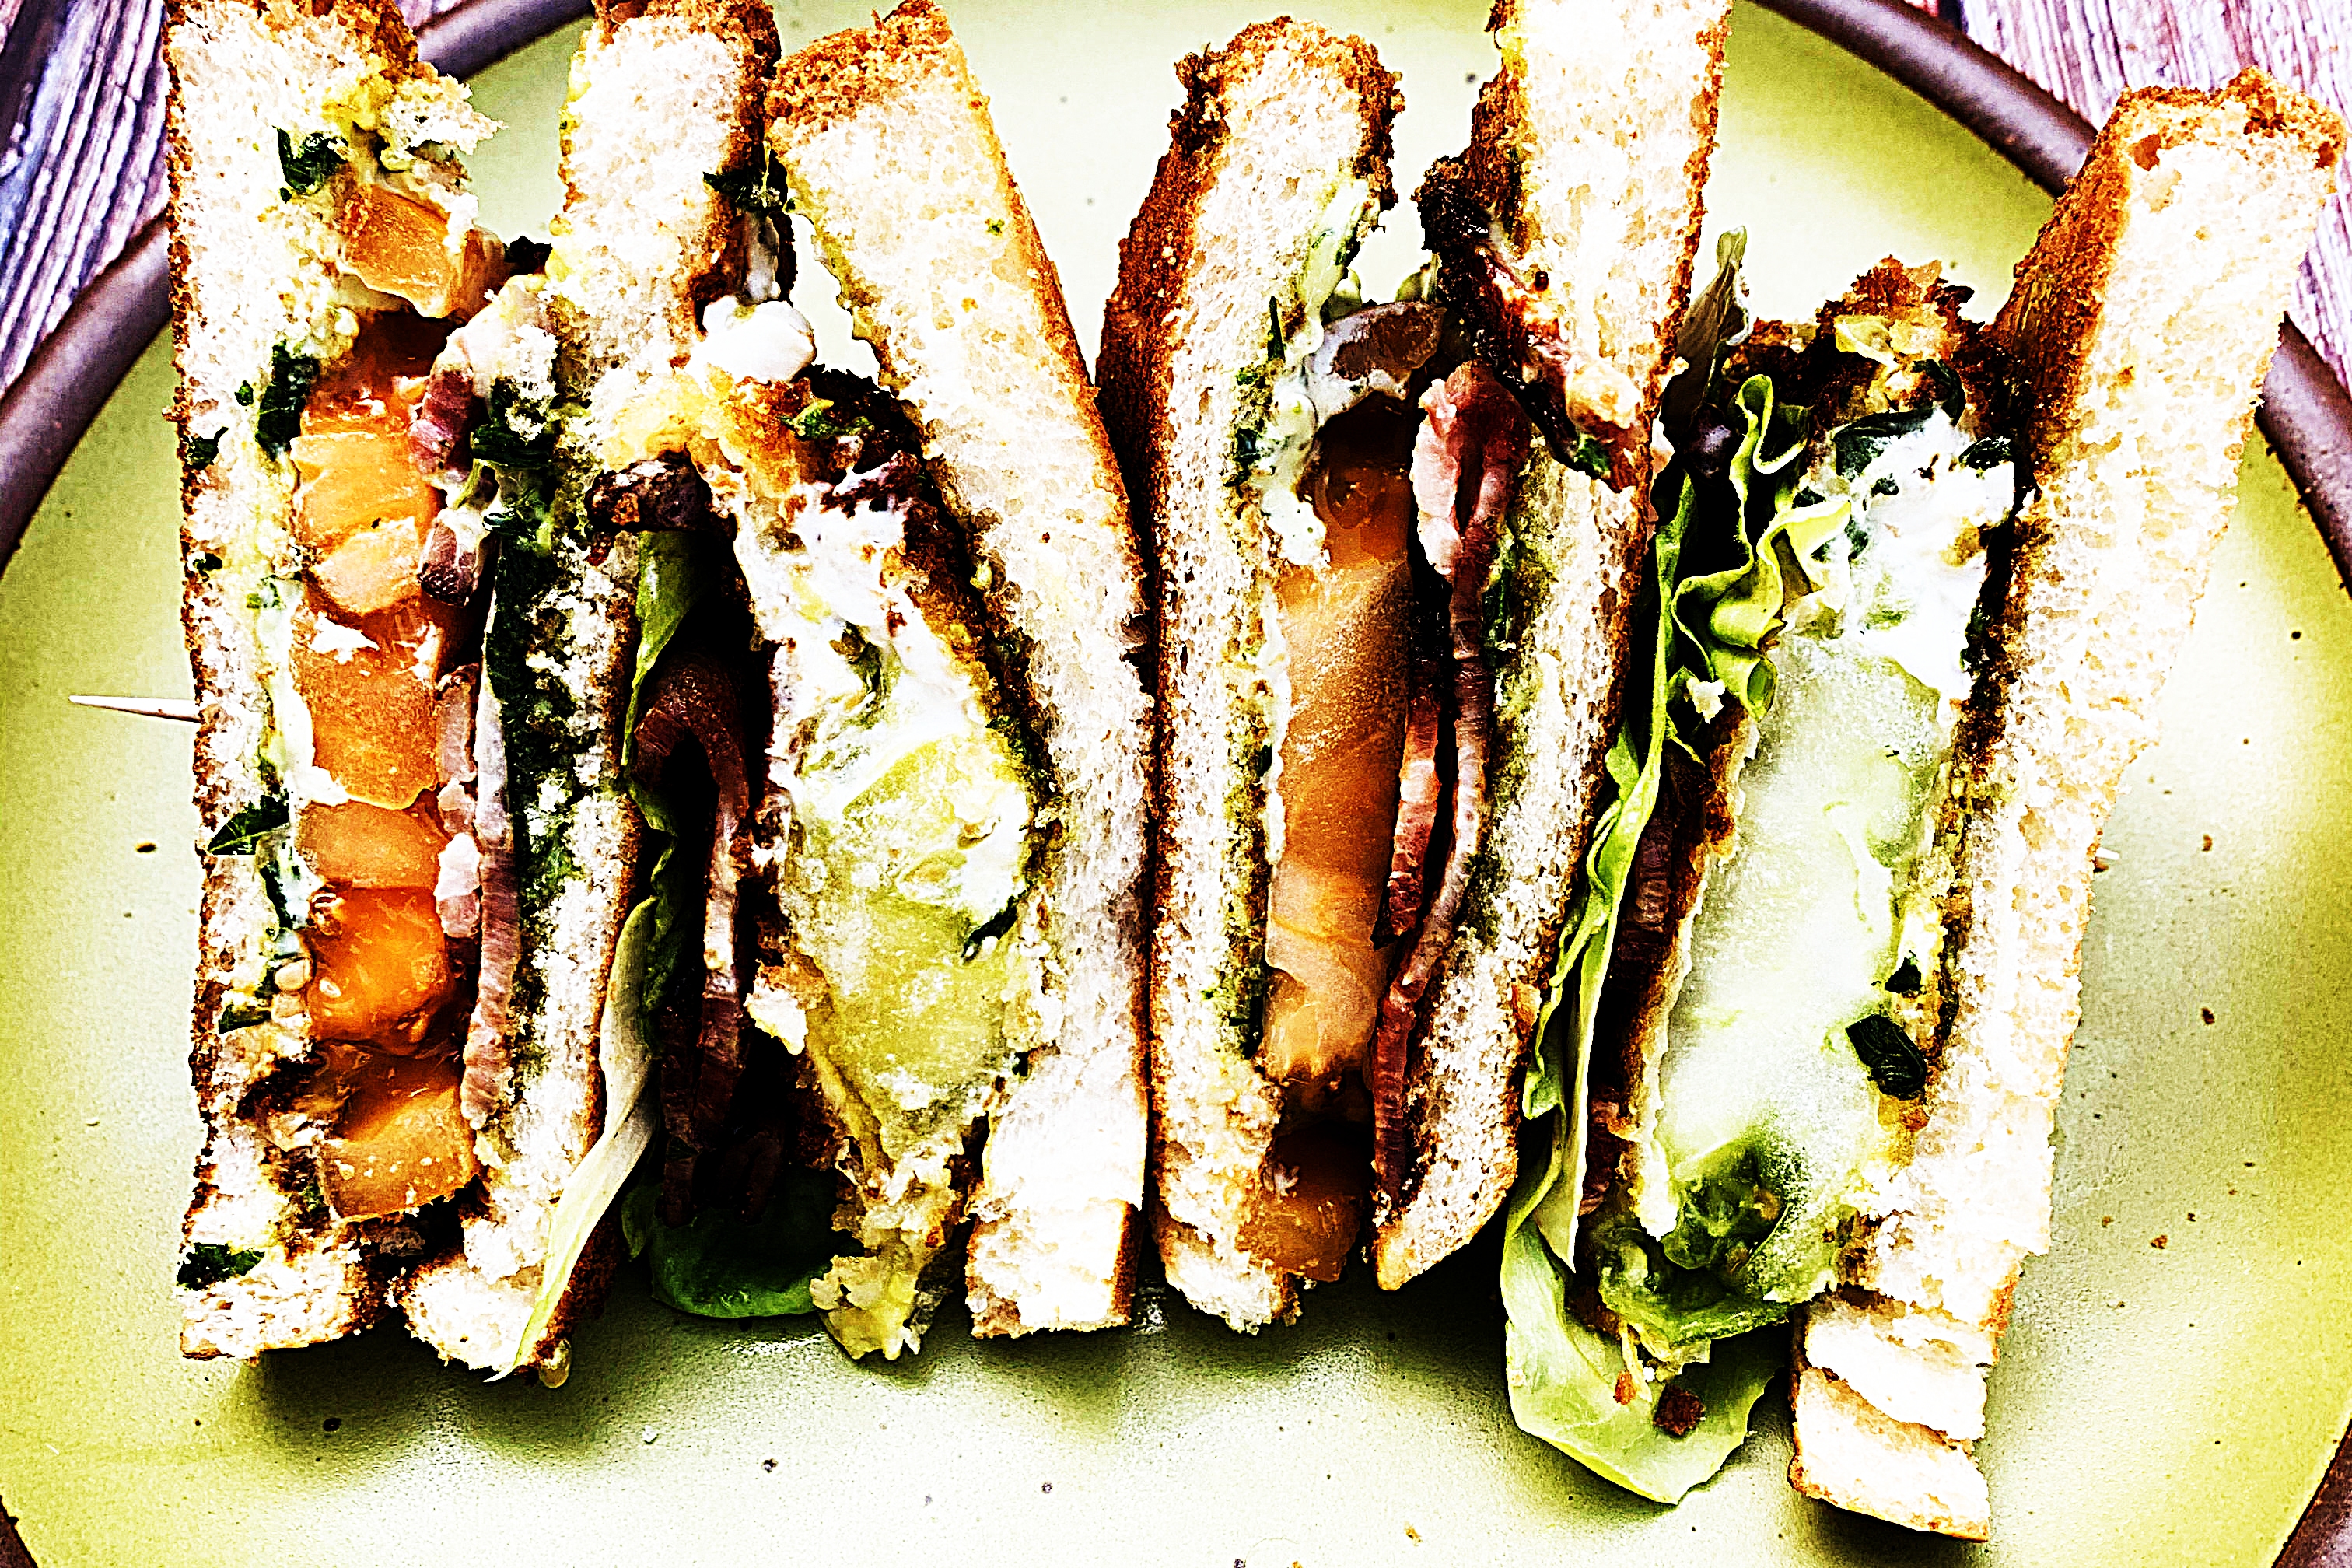 Stupid-Easy Recipe for Fried Green Tomato BLT in Seconds (#1 Top-Rated)